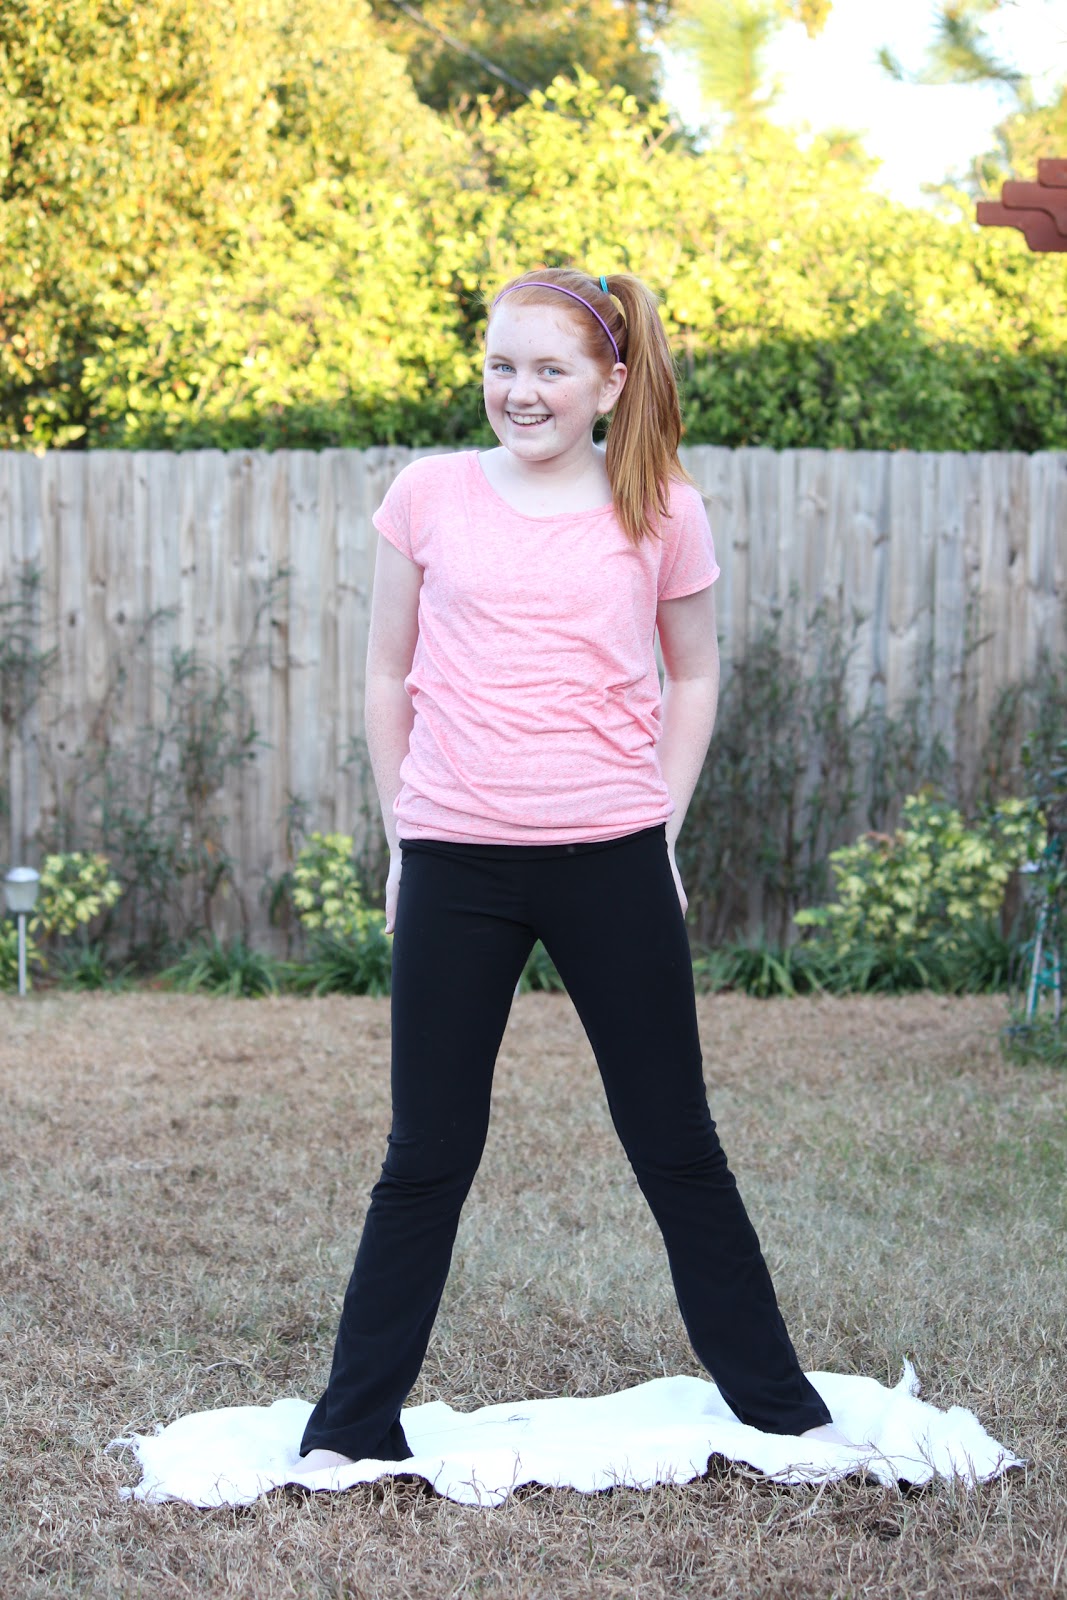 Teen Sew! A Teen's Guide to Sewing: Yoga Pants and Other Sporty Things